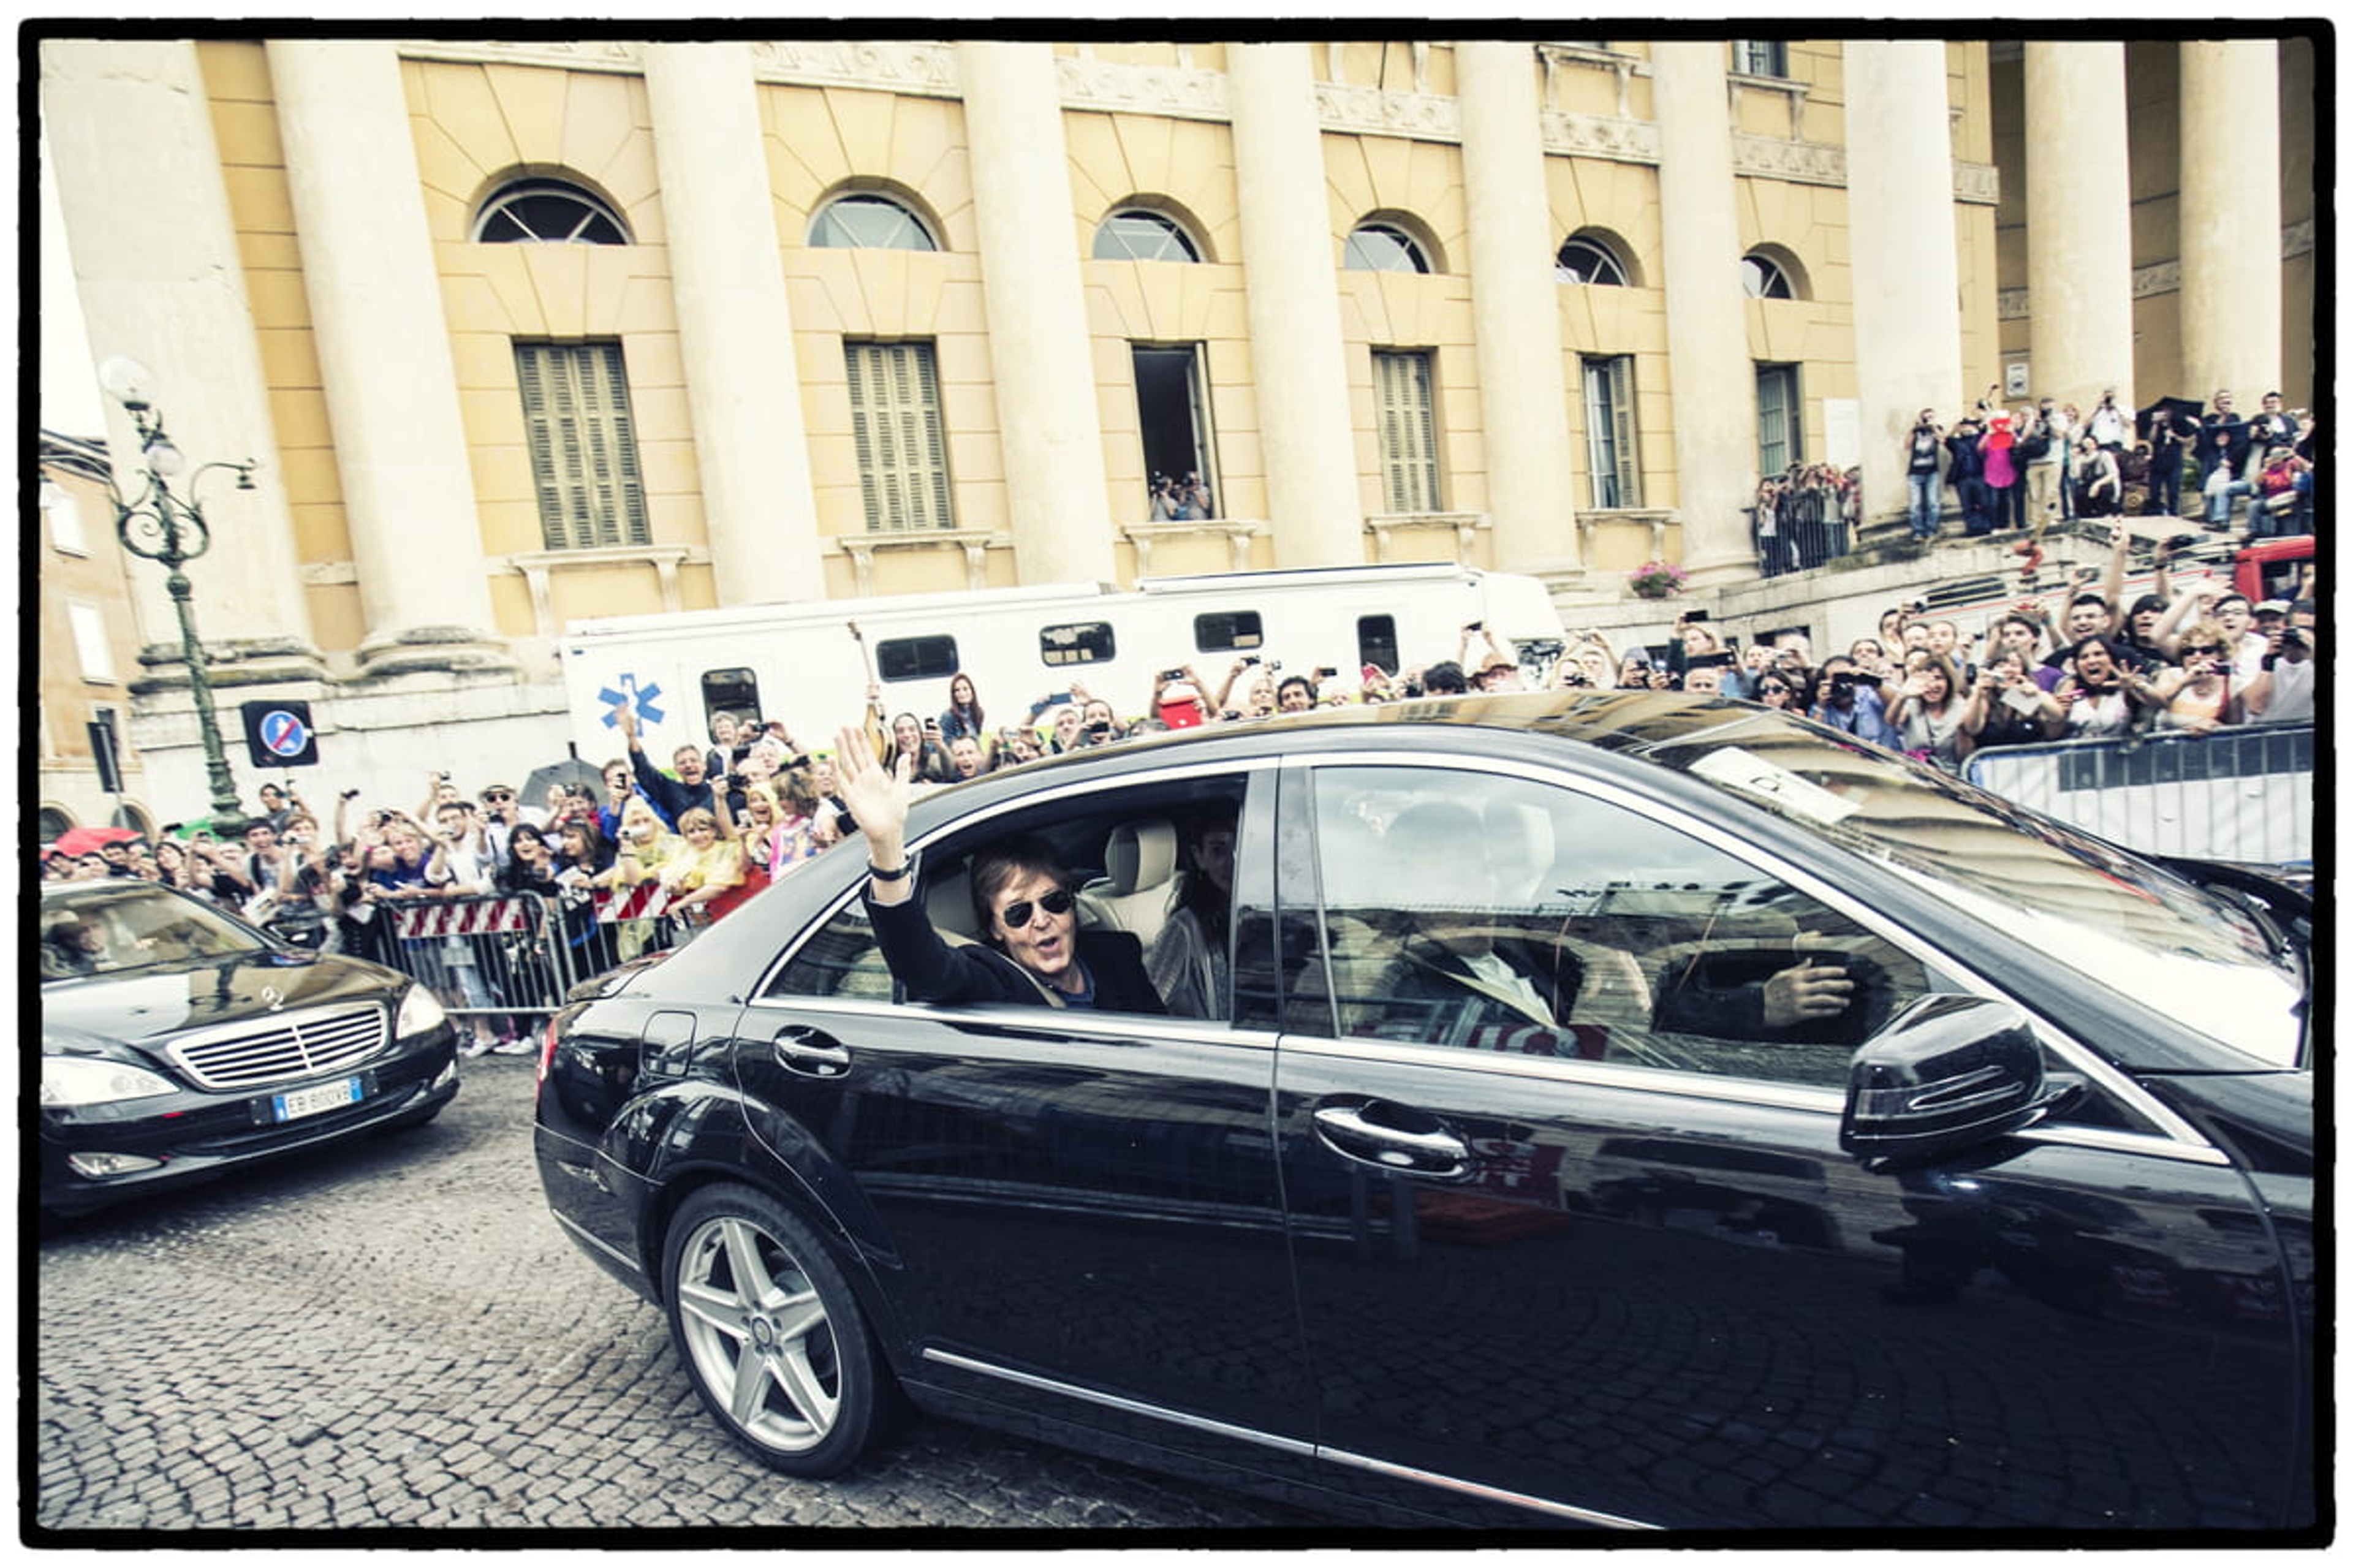 Paul travelling to the venue, Verona, June 25th 2013